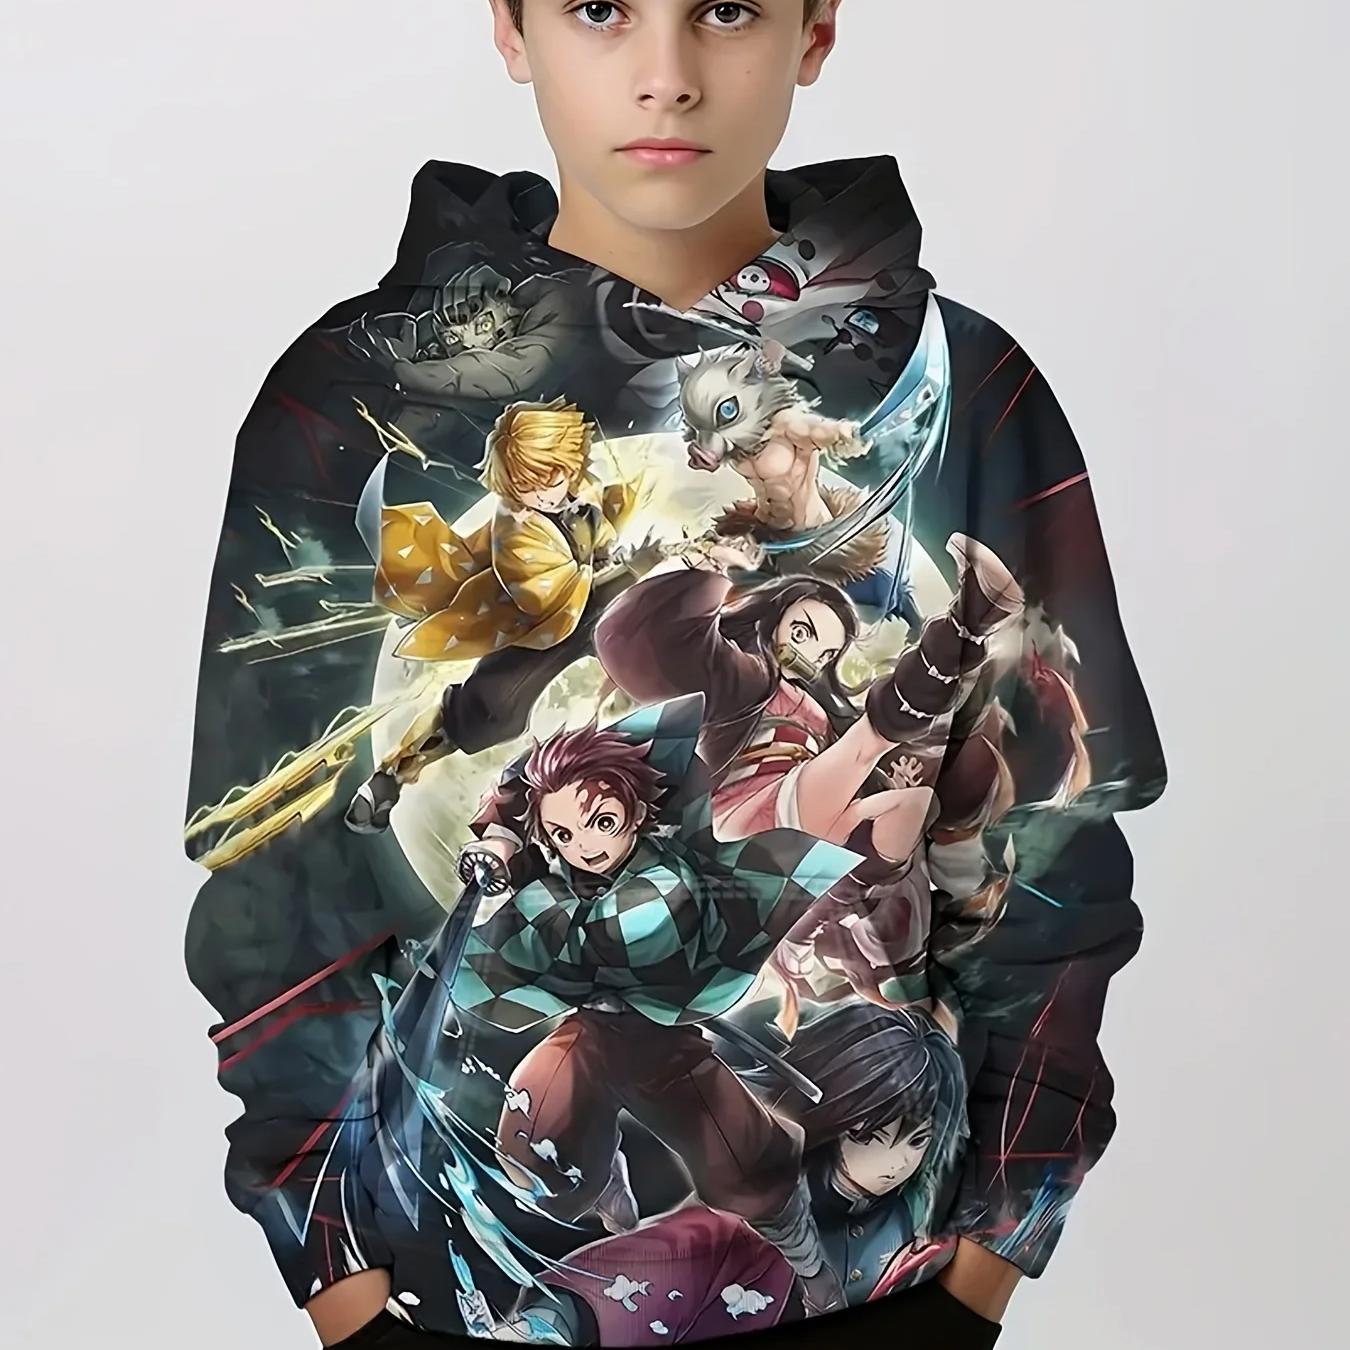 ETST 07 Anime Pattern 3d Print Boys Casual Hooded Pullover Hooded Long Sleeve Sweatshirt For Spring Fall Kids Hoodies Outdoor Tops